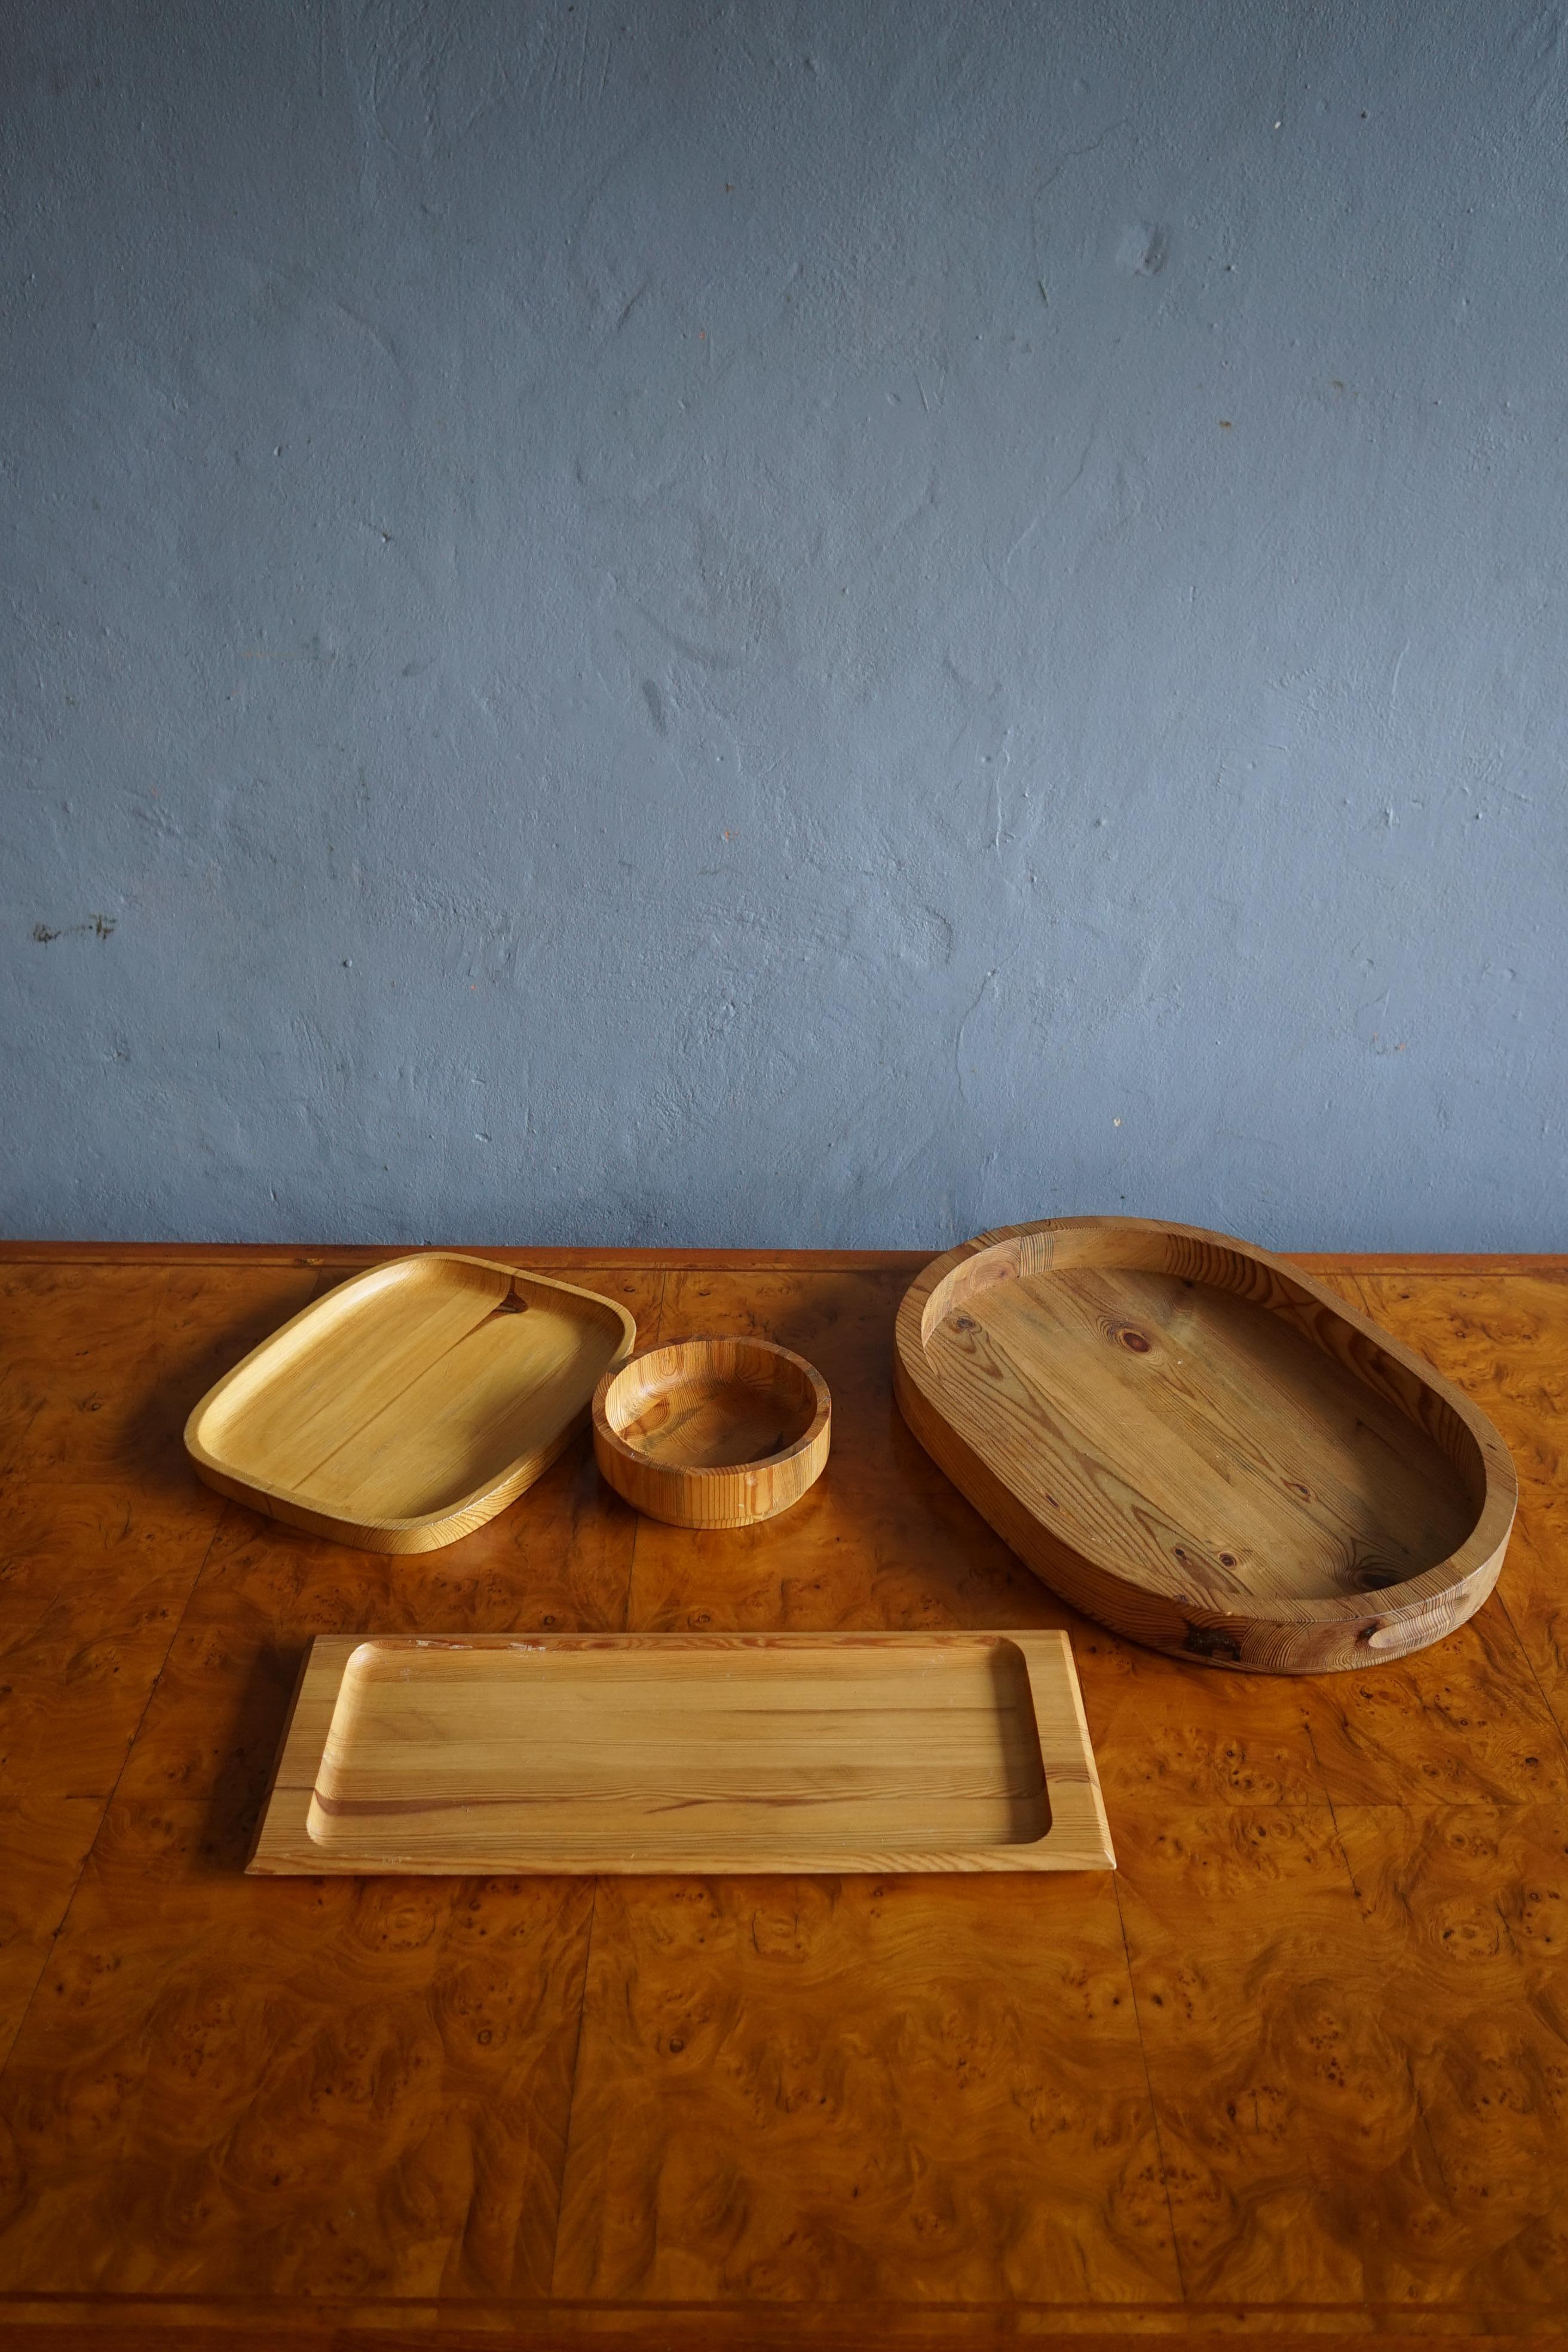 Rare collection of Swedish wooden bowls and dish made in pine wood.

The collection includes 3 different dishes and a bowl, all with a great structure and beautiful grain and patina.

The bowls and dishes are similar to works by artists and